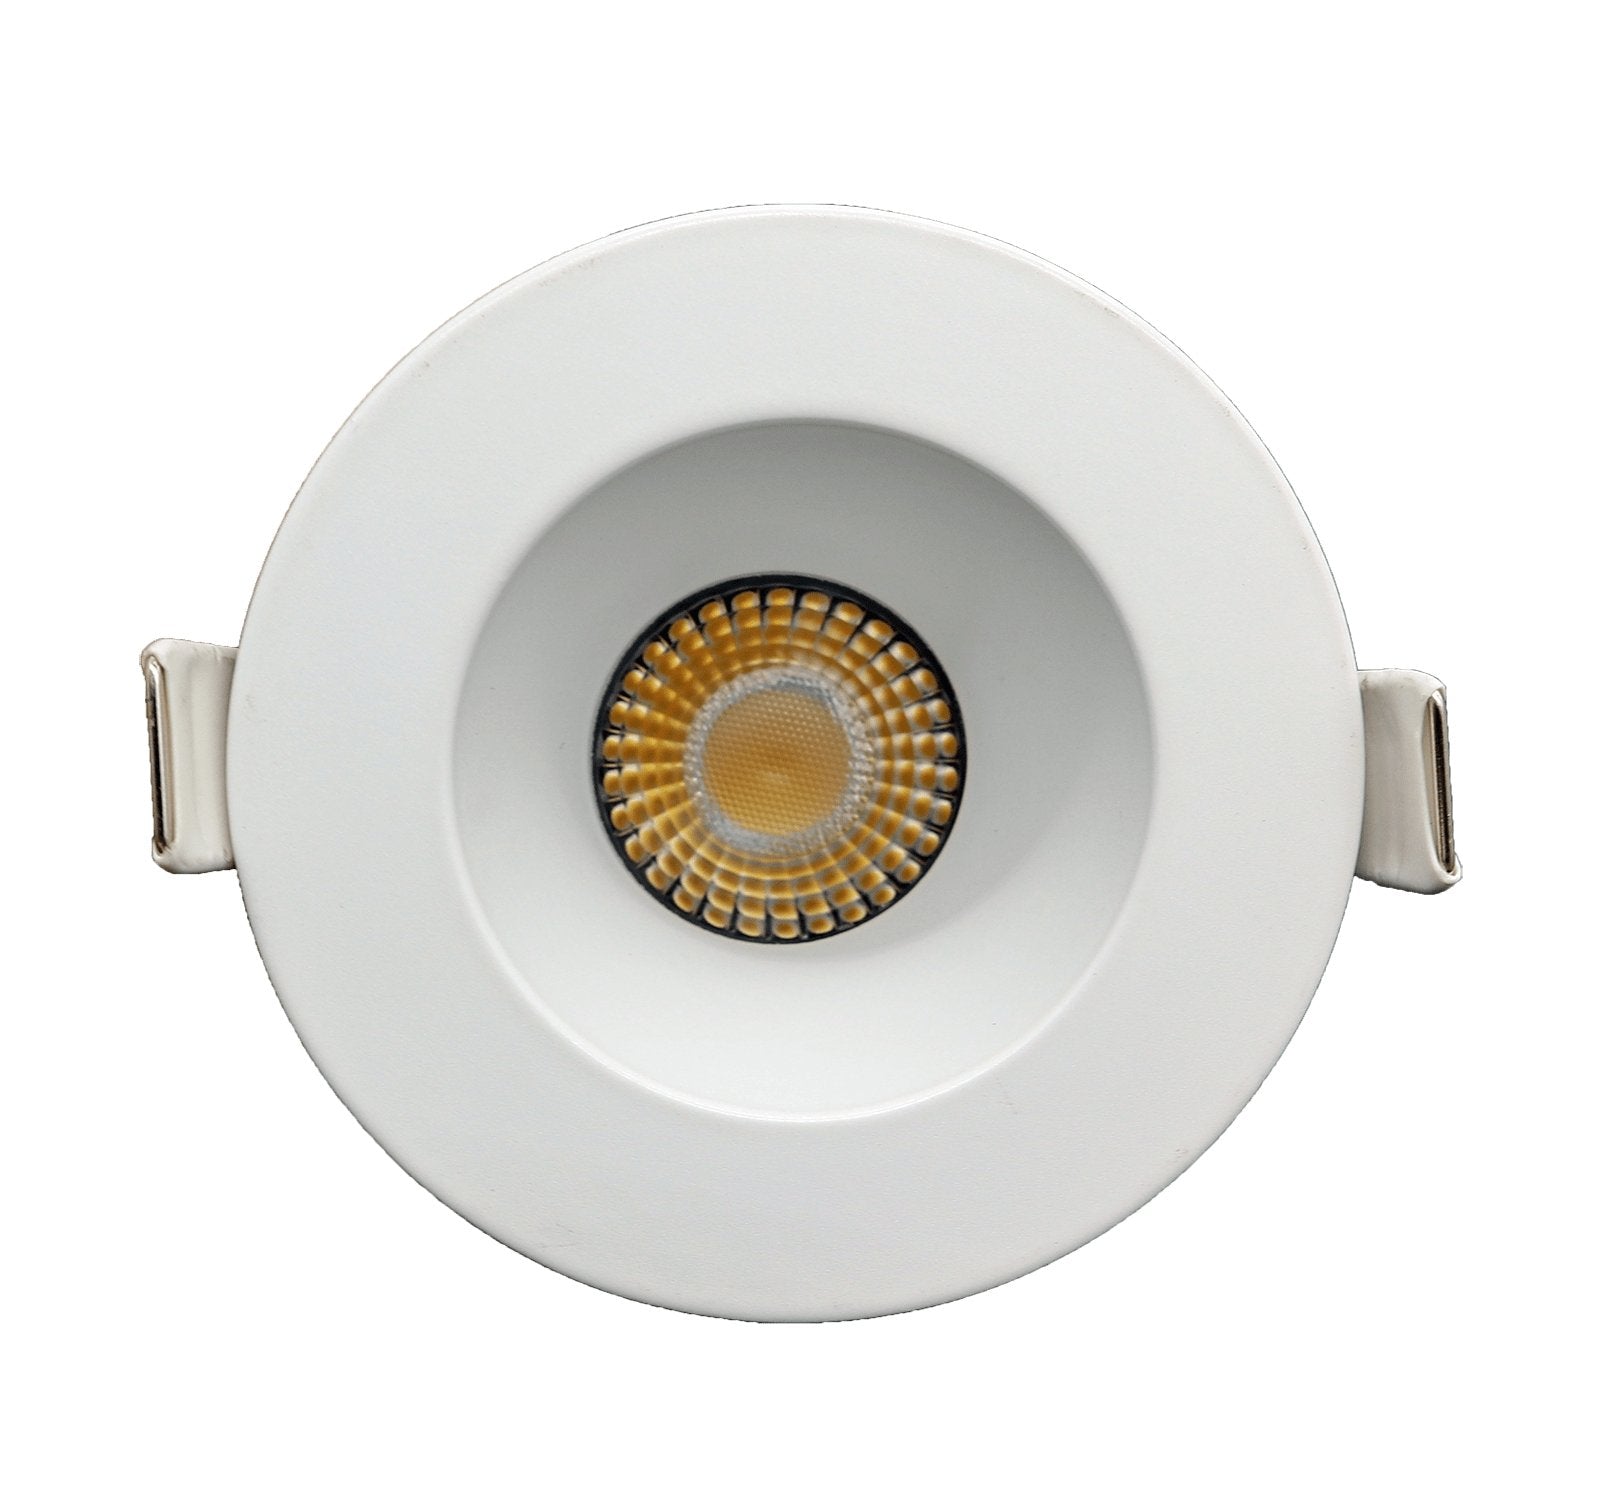 GDL-G48341Goodlite Changeable Trim for 2" 8W/14W Regress Luminaire Selectable CCT